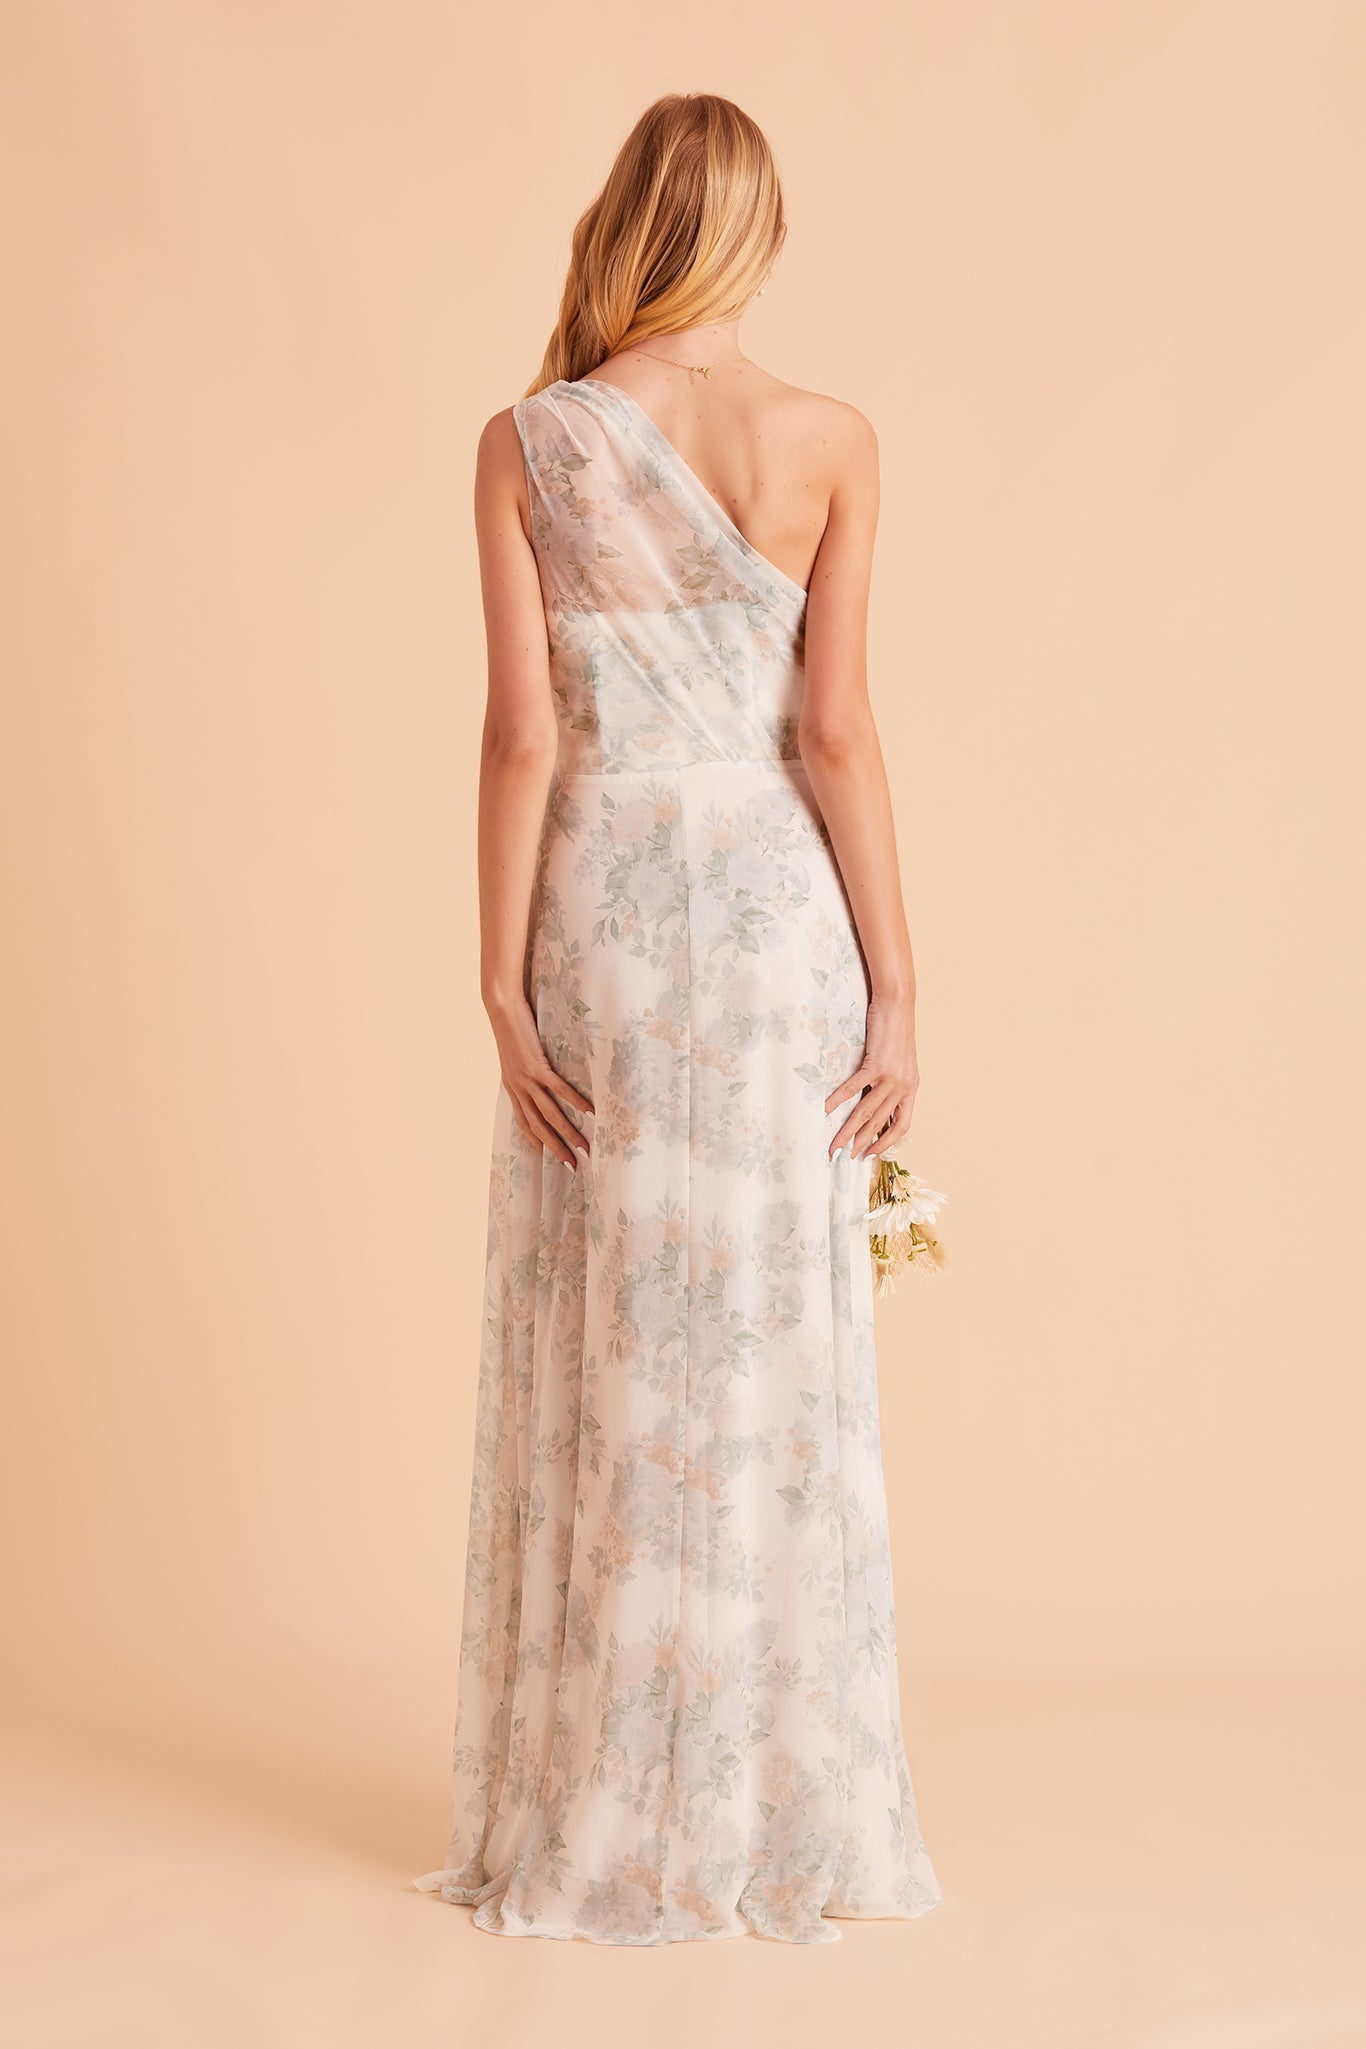 Kira bridesmaid dress in sage bouquet floral print chiffon by Birdy Grey, back view